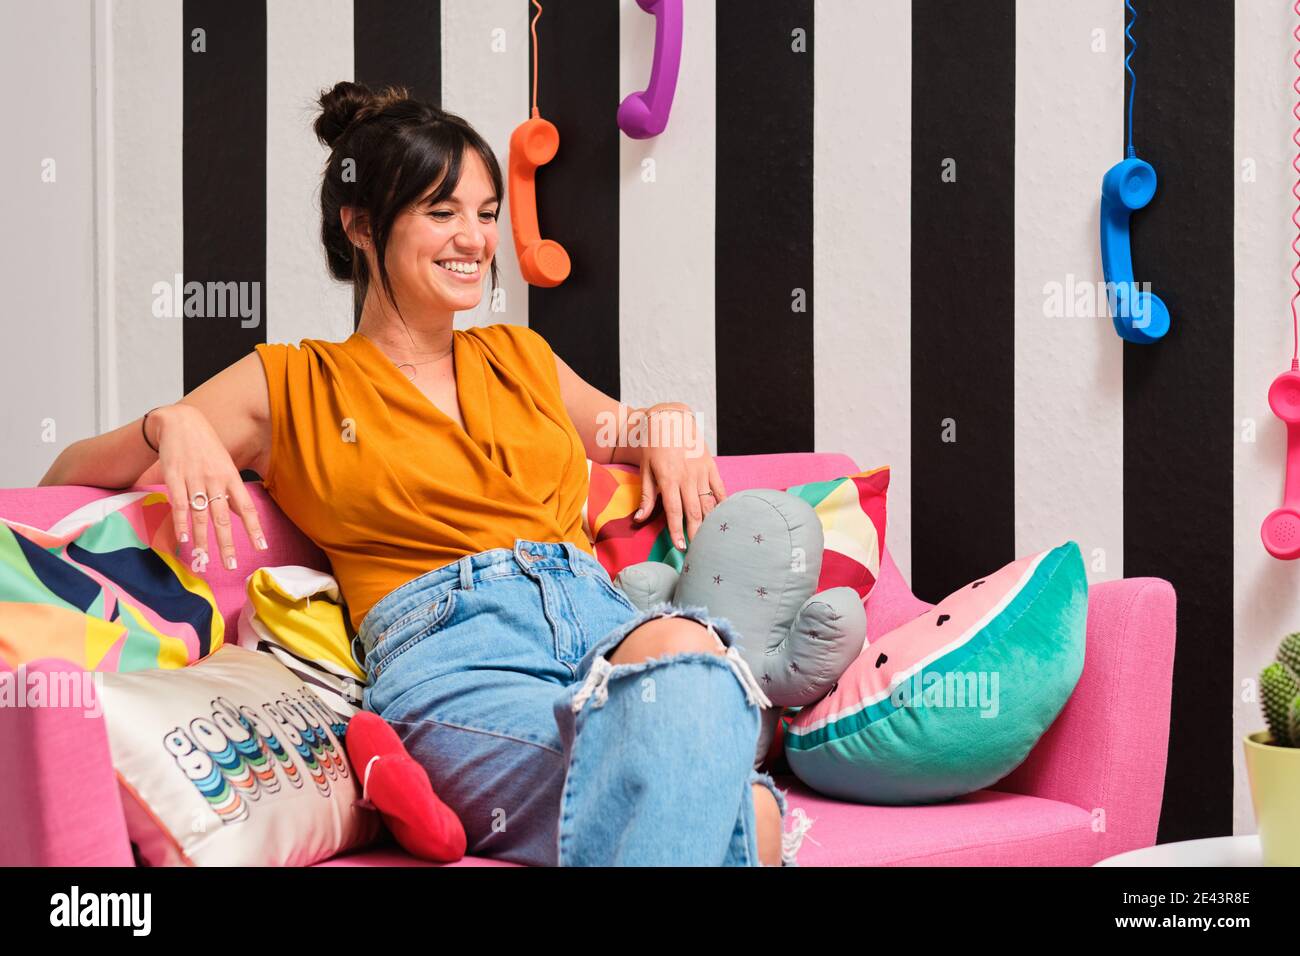 Young female in trendy ripped jeans laughing happily while resting on pink couch with colorful cushions in stylish room with retro telephone receivers Stock Photo